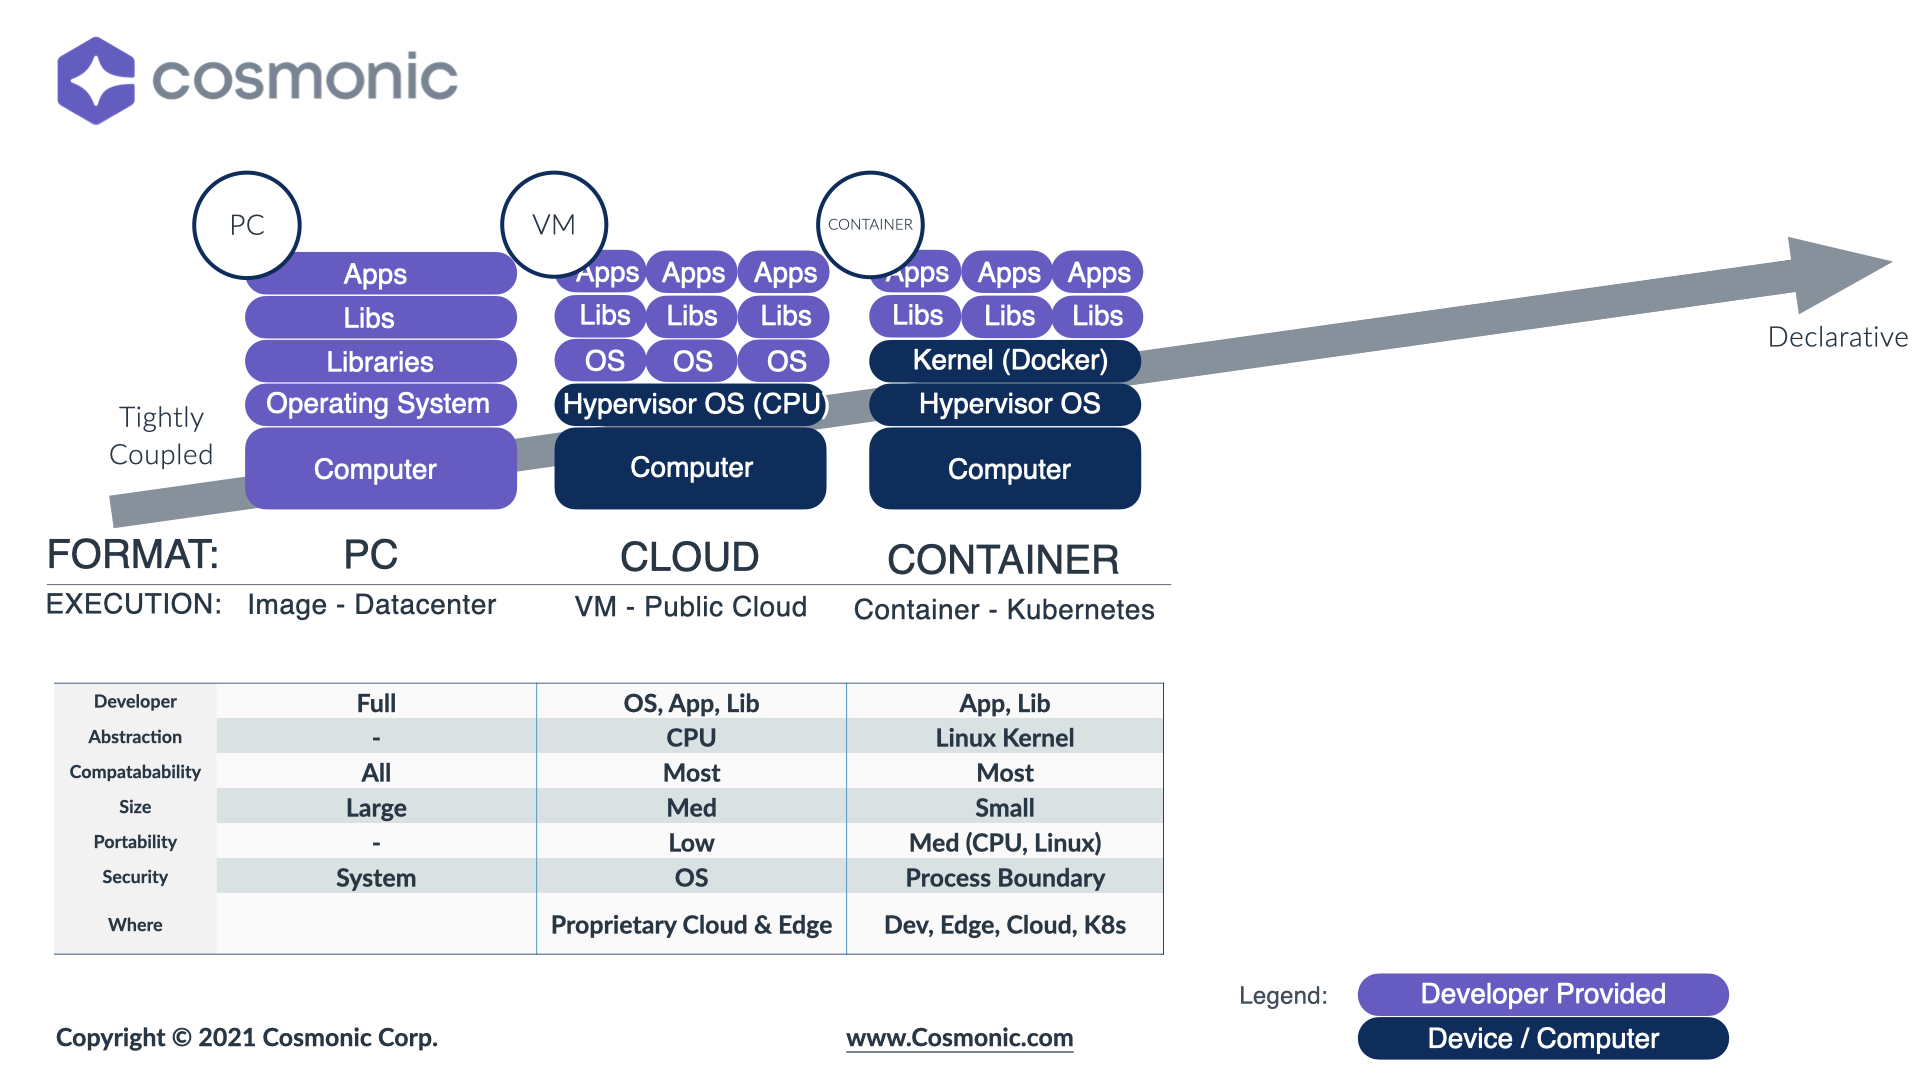 Epochs of Cloud Computing Technology - Containers